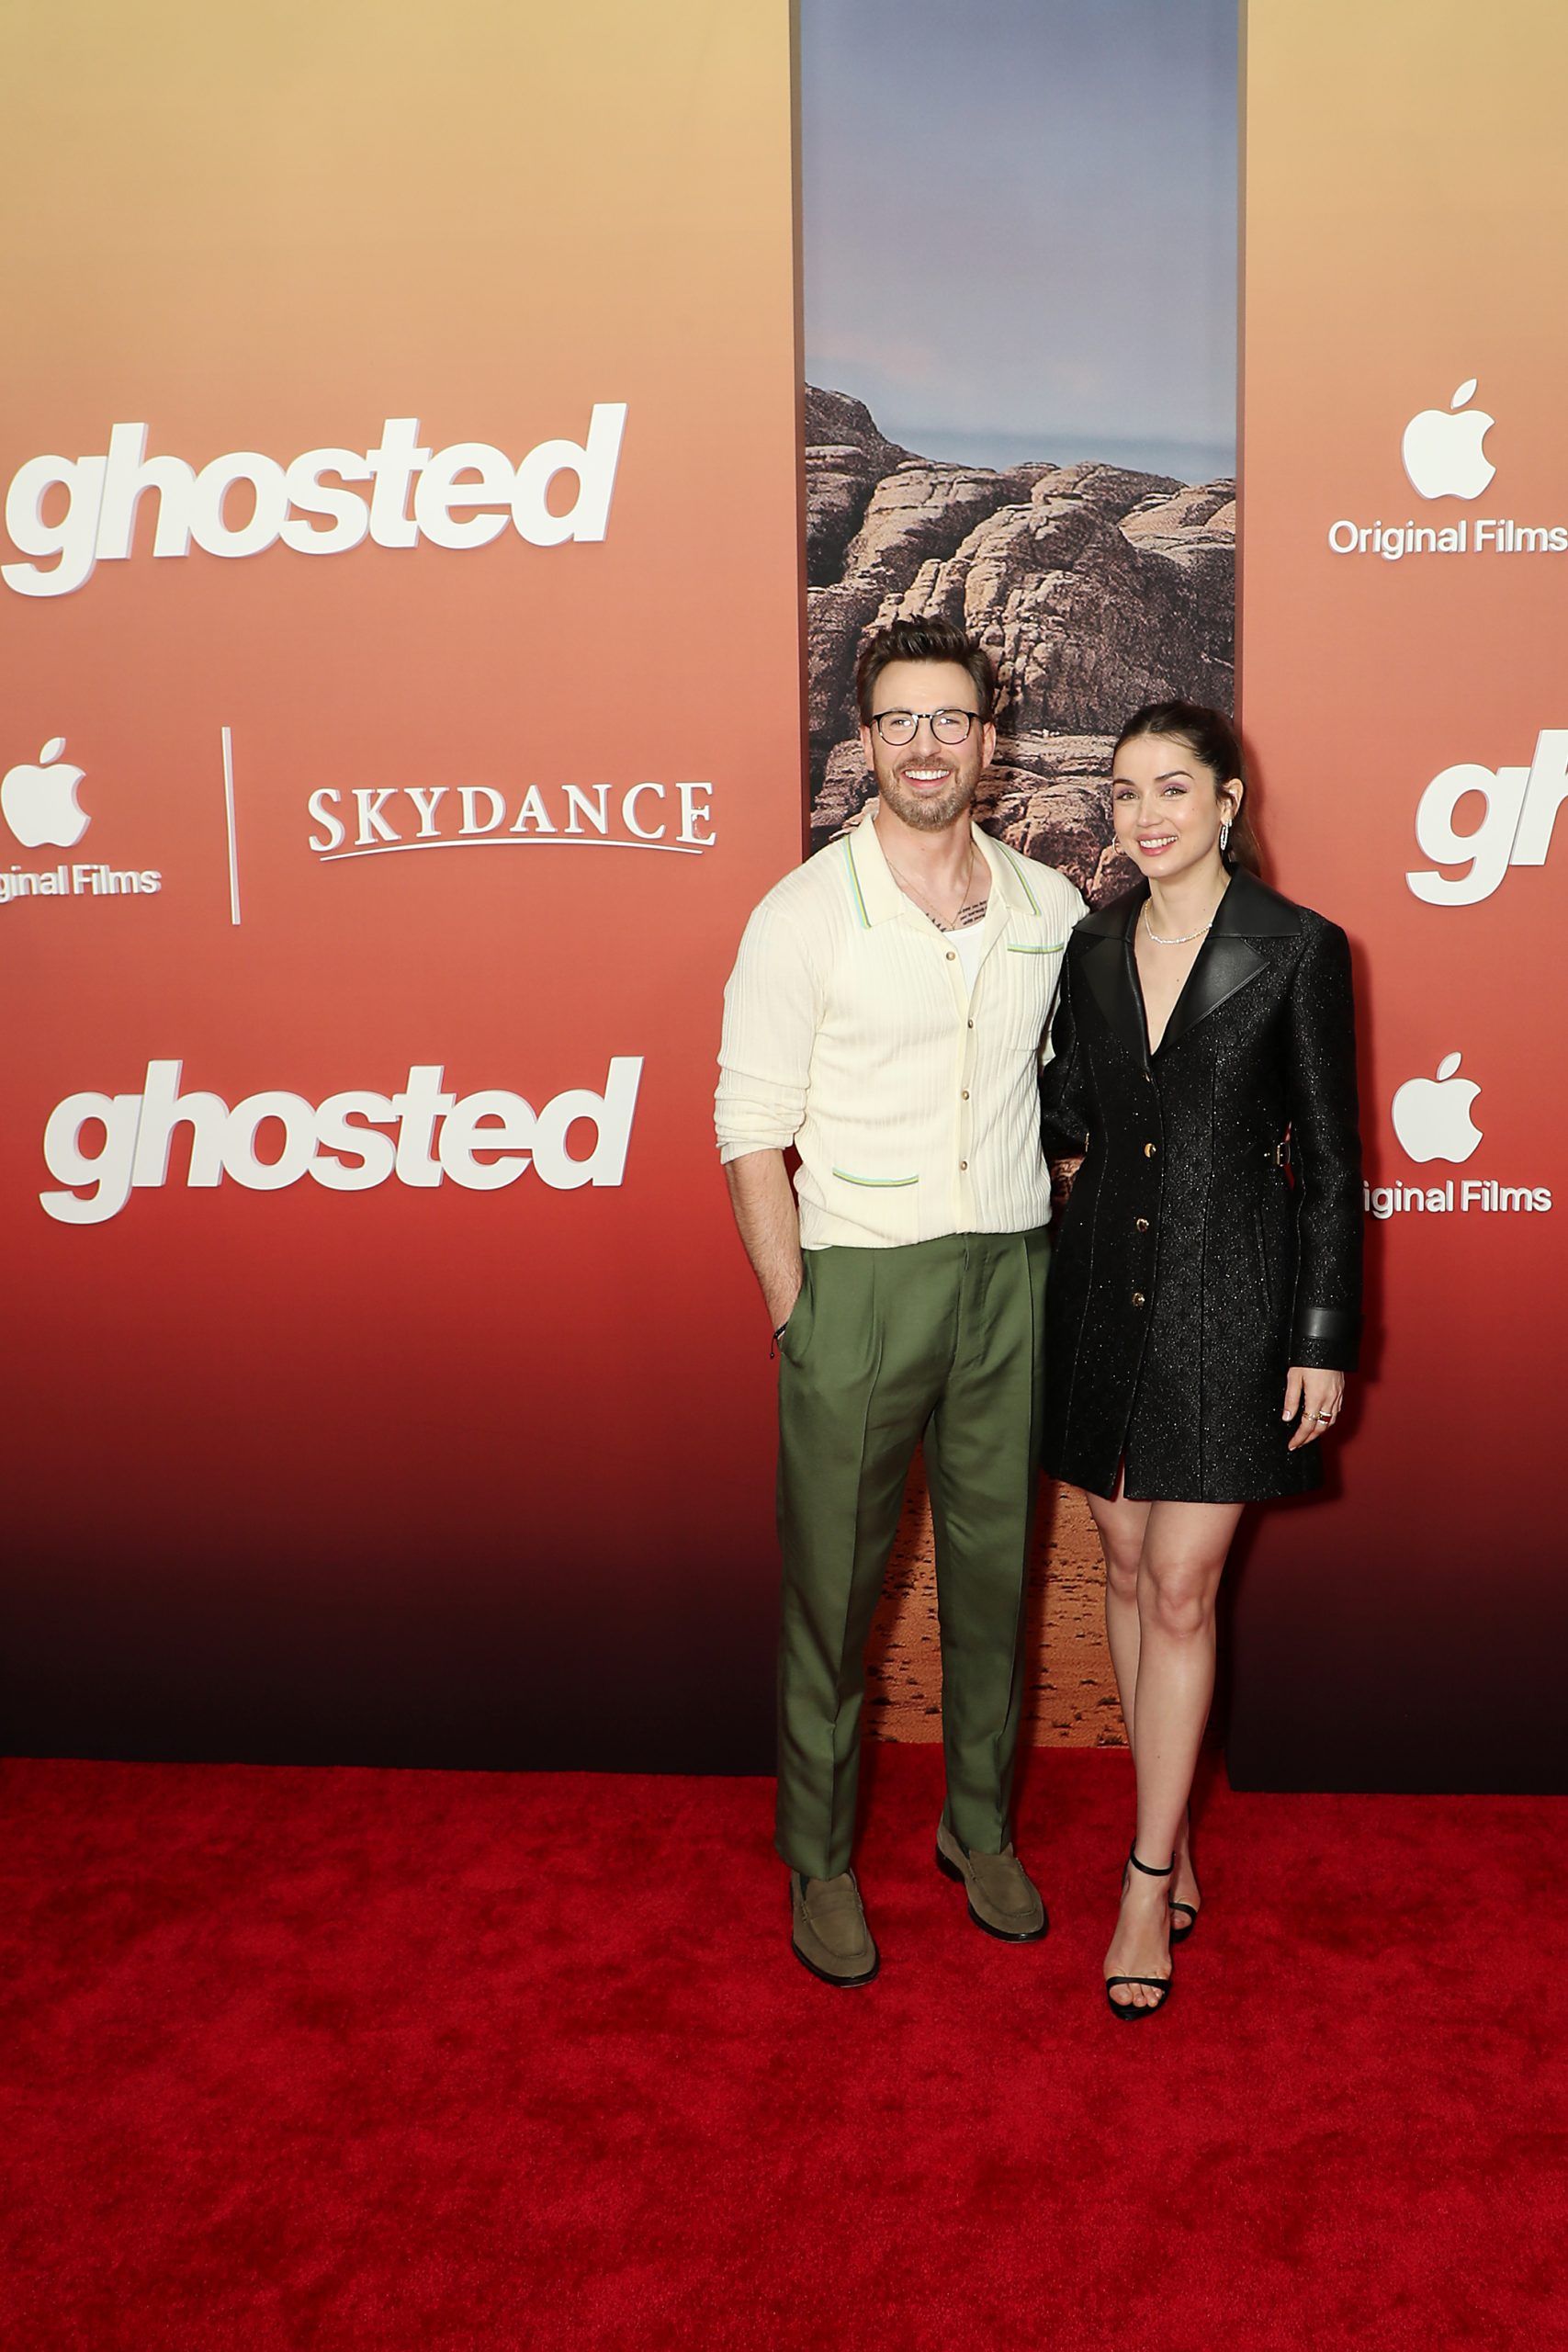 Red Carpet Rundown: ‘Ghosted’ New York Premiere